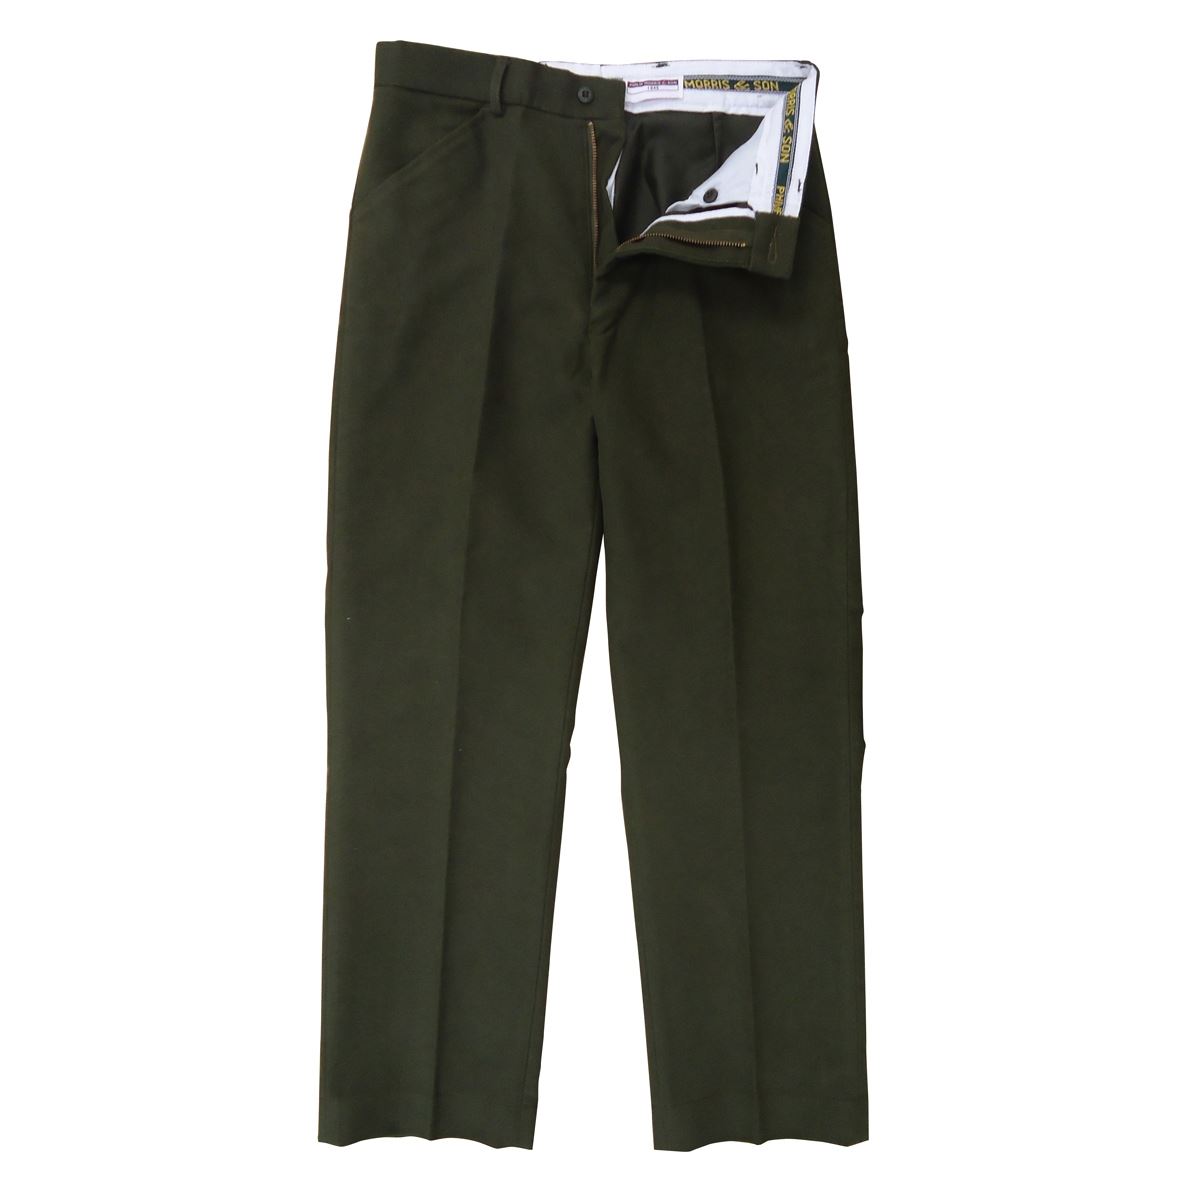 Should a belt be worn with Heritage 1845 Moleskin Trousers?